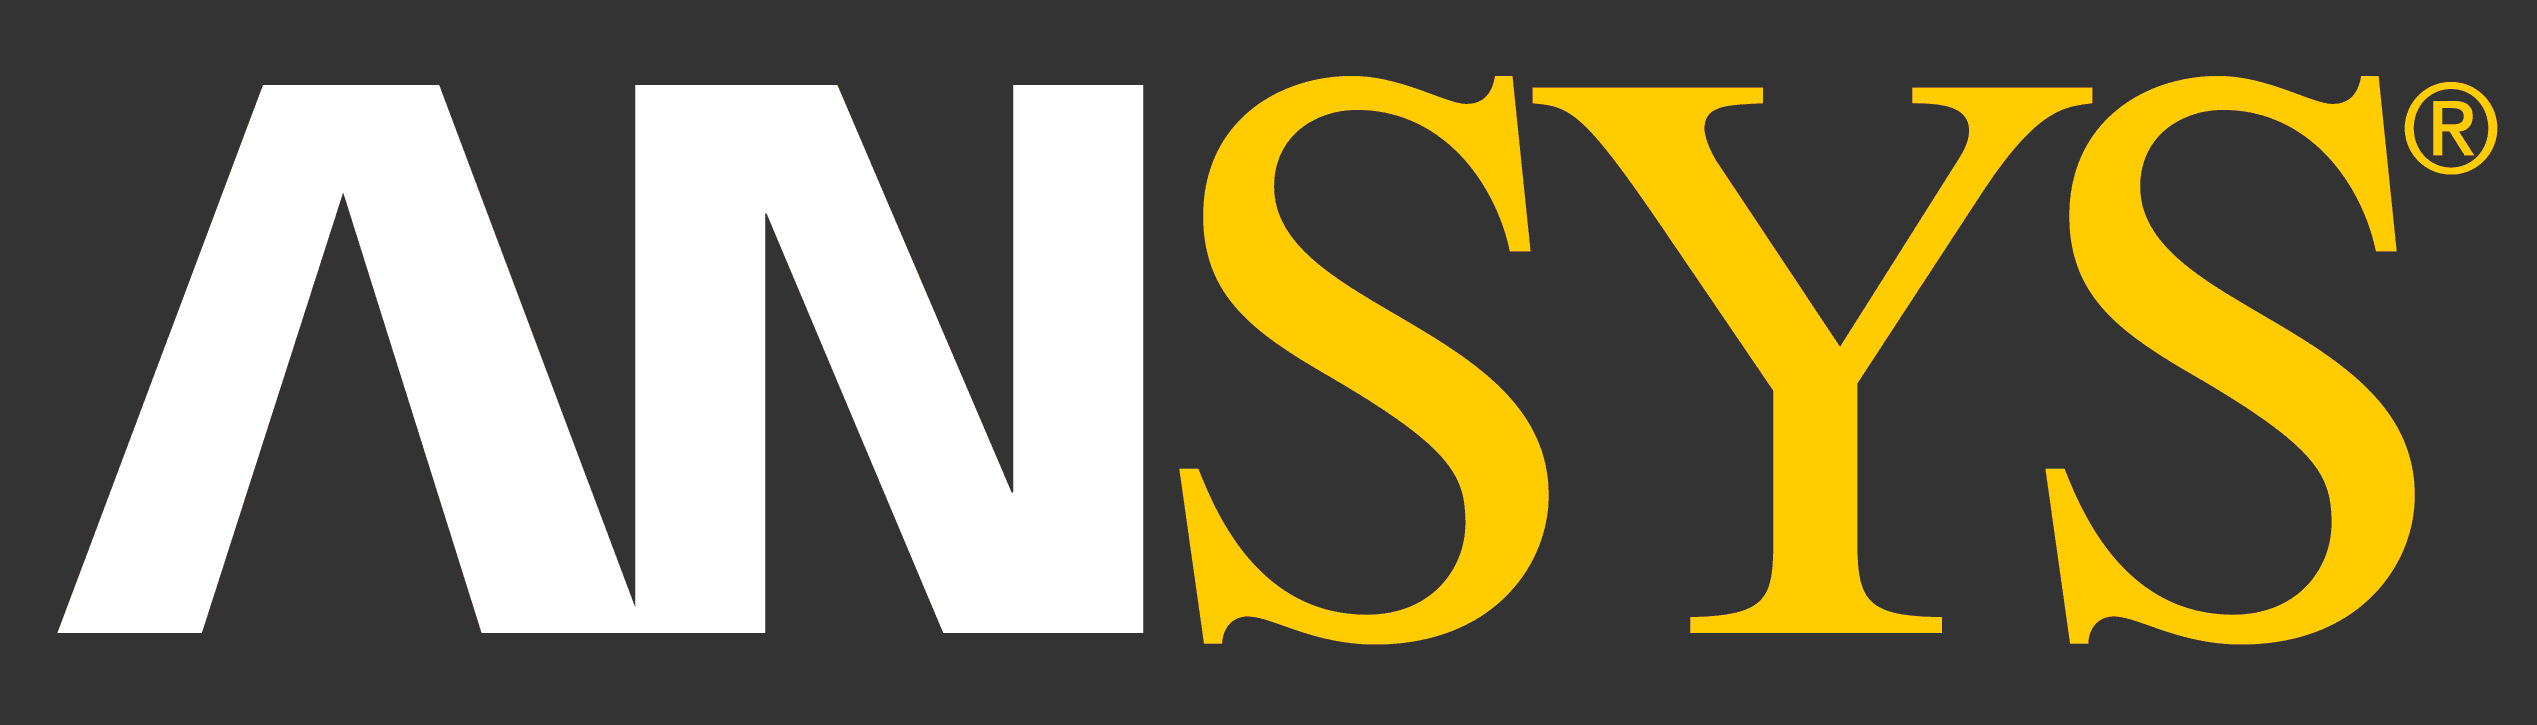 Ansys logo and The Internet of Things